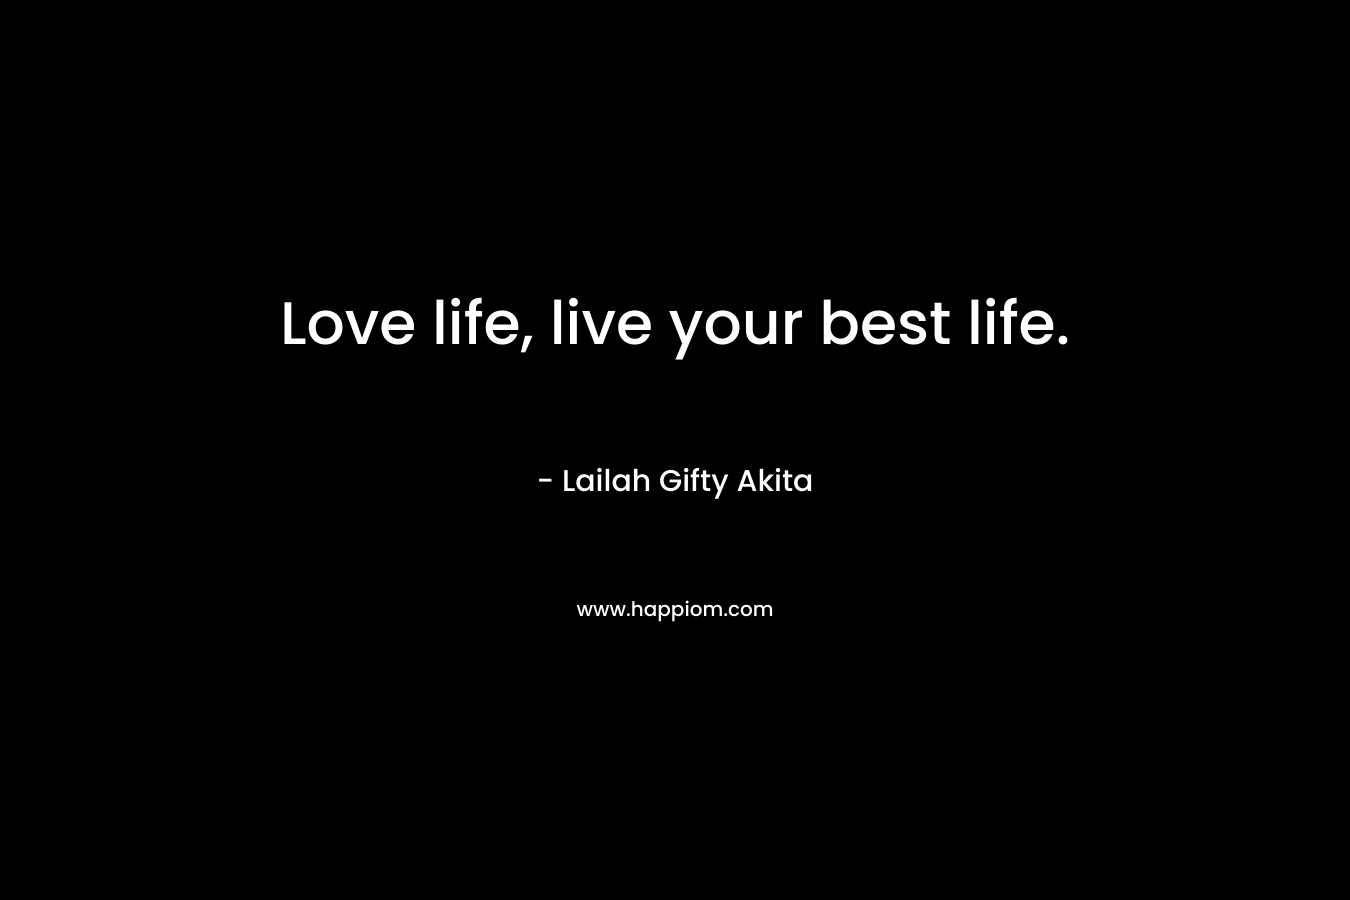 Love life, live your best life.